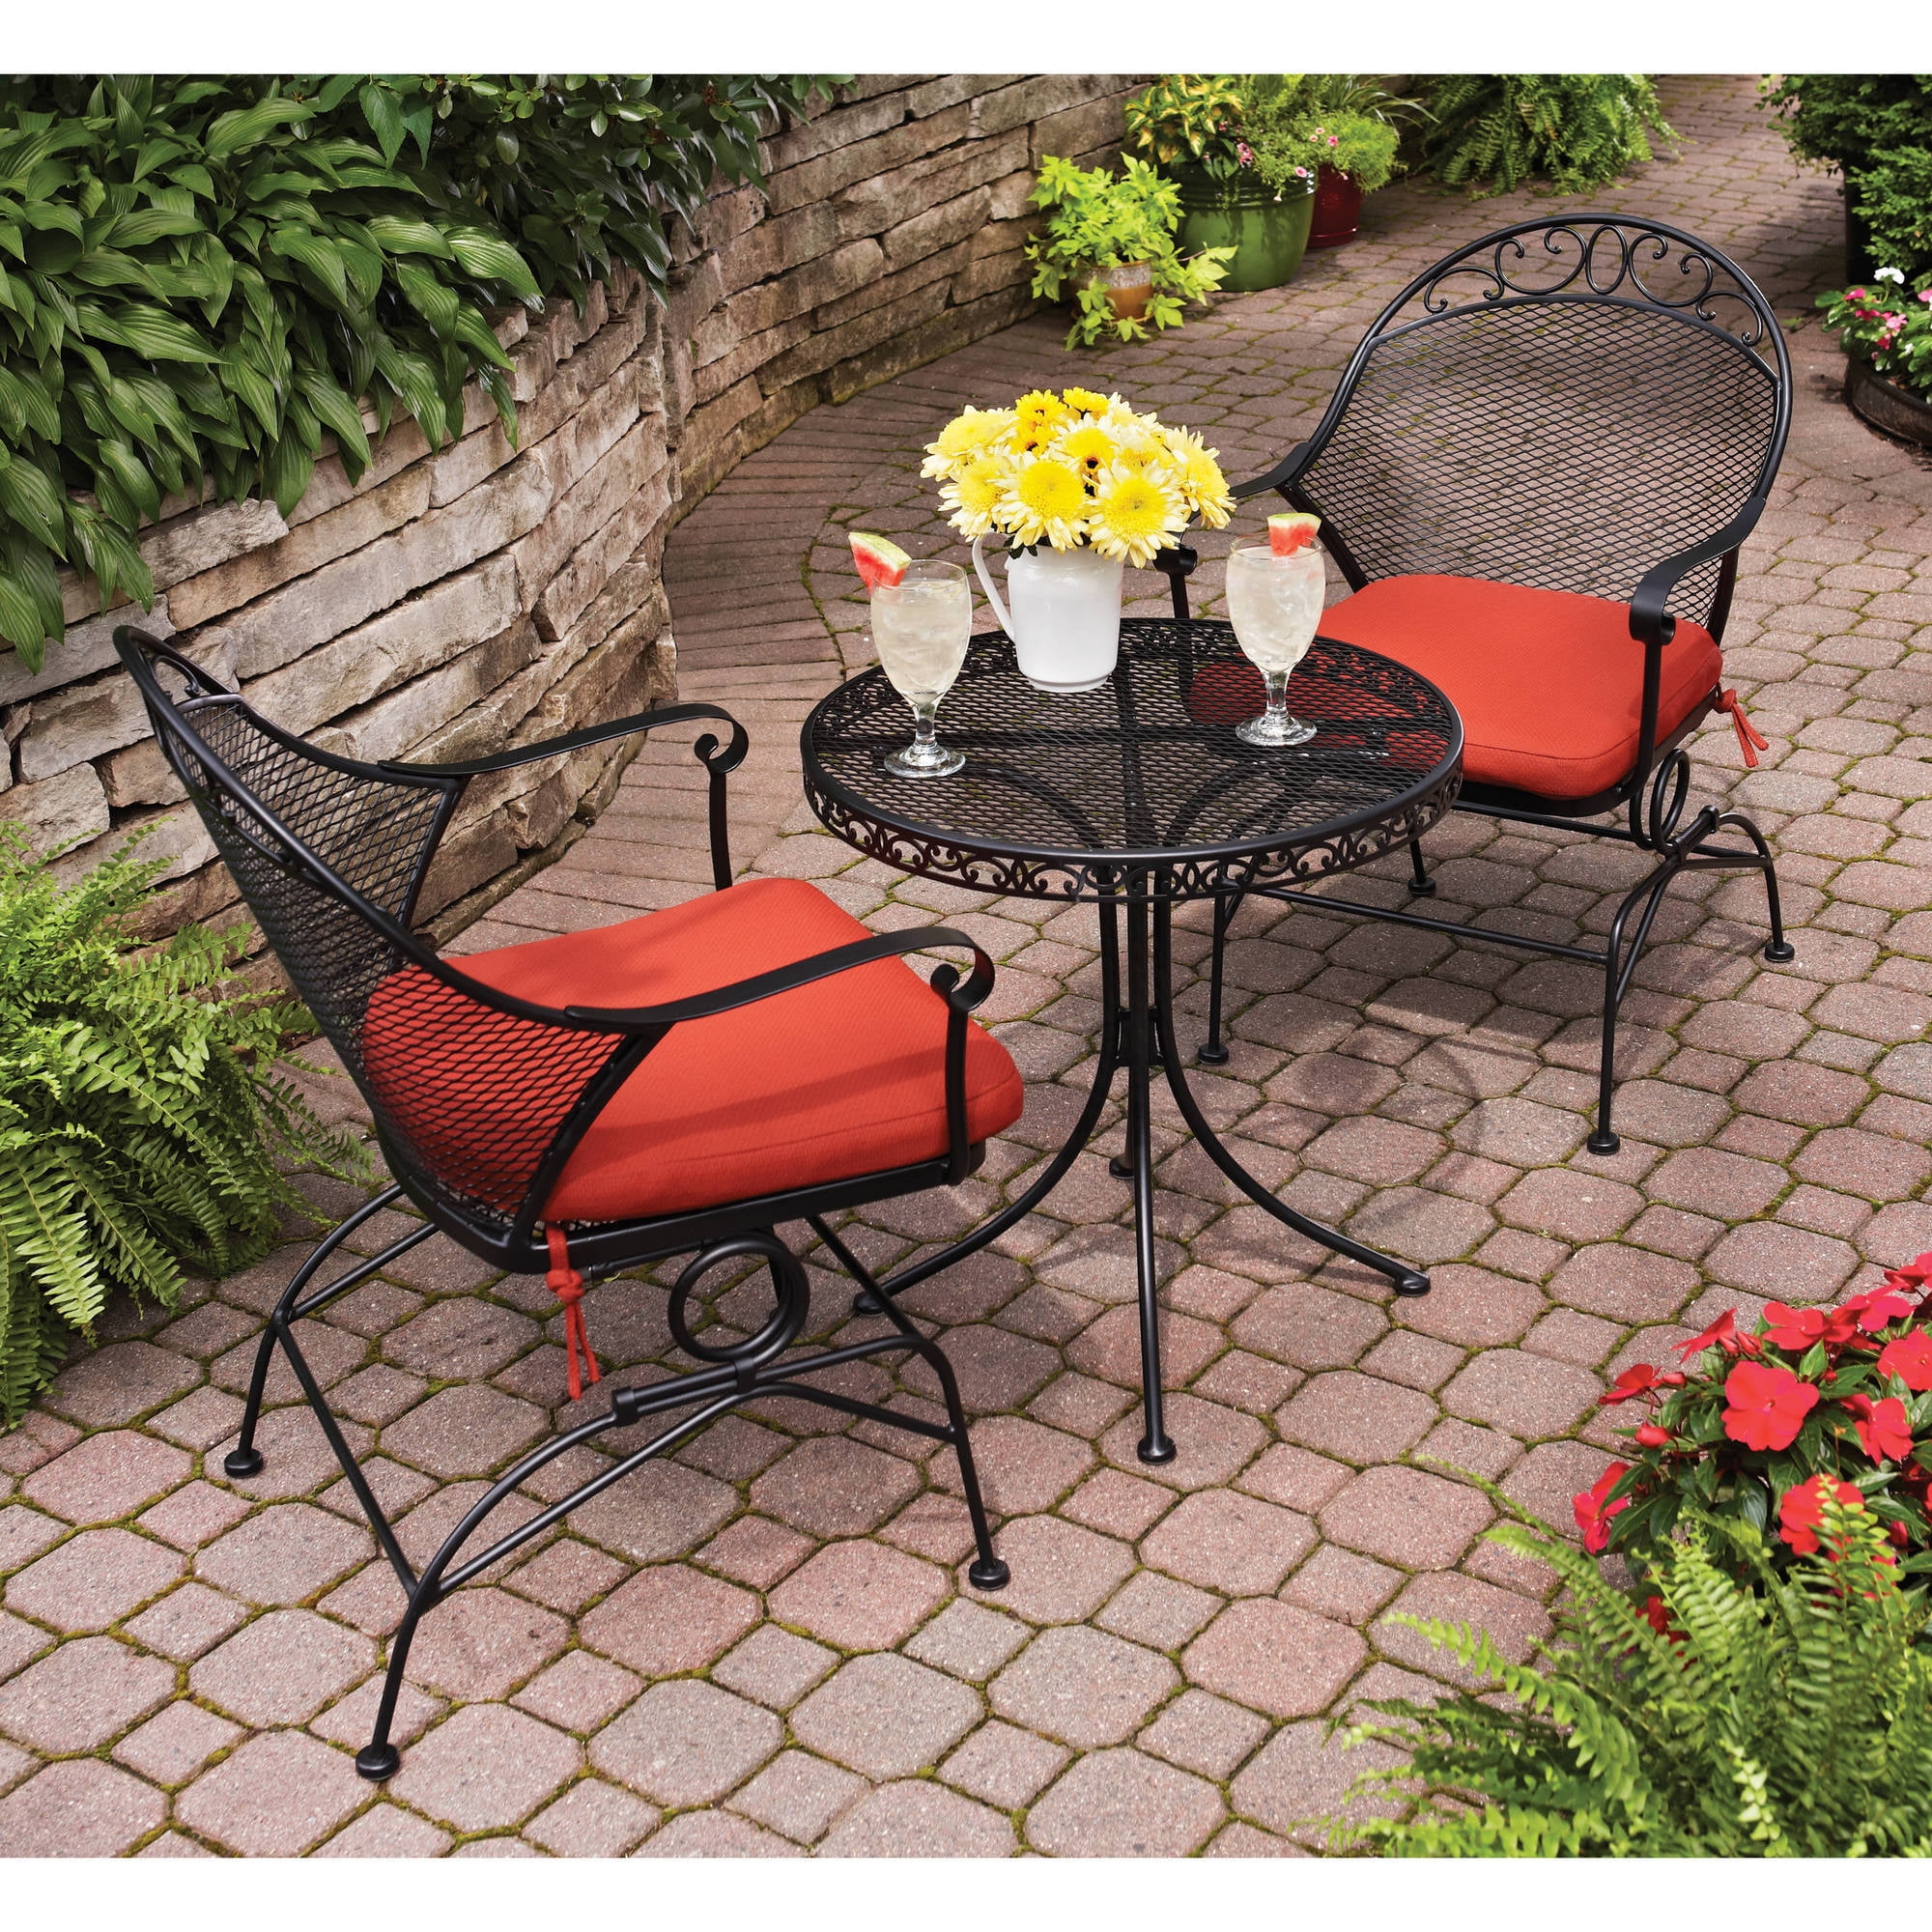 Outdoor Iron Table Chairs Off 61, Iron Chairs Outdoor